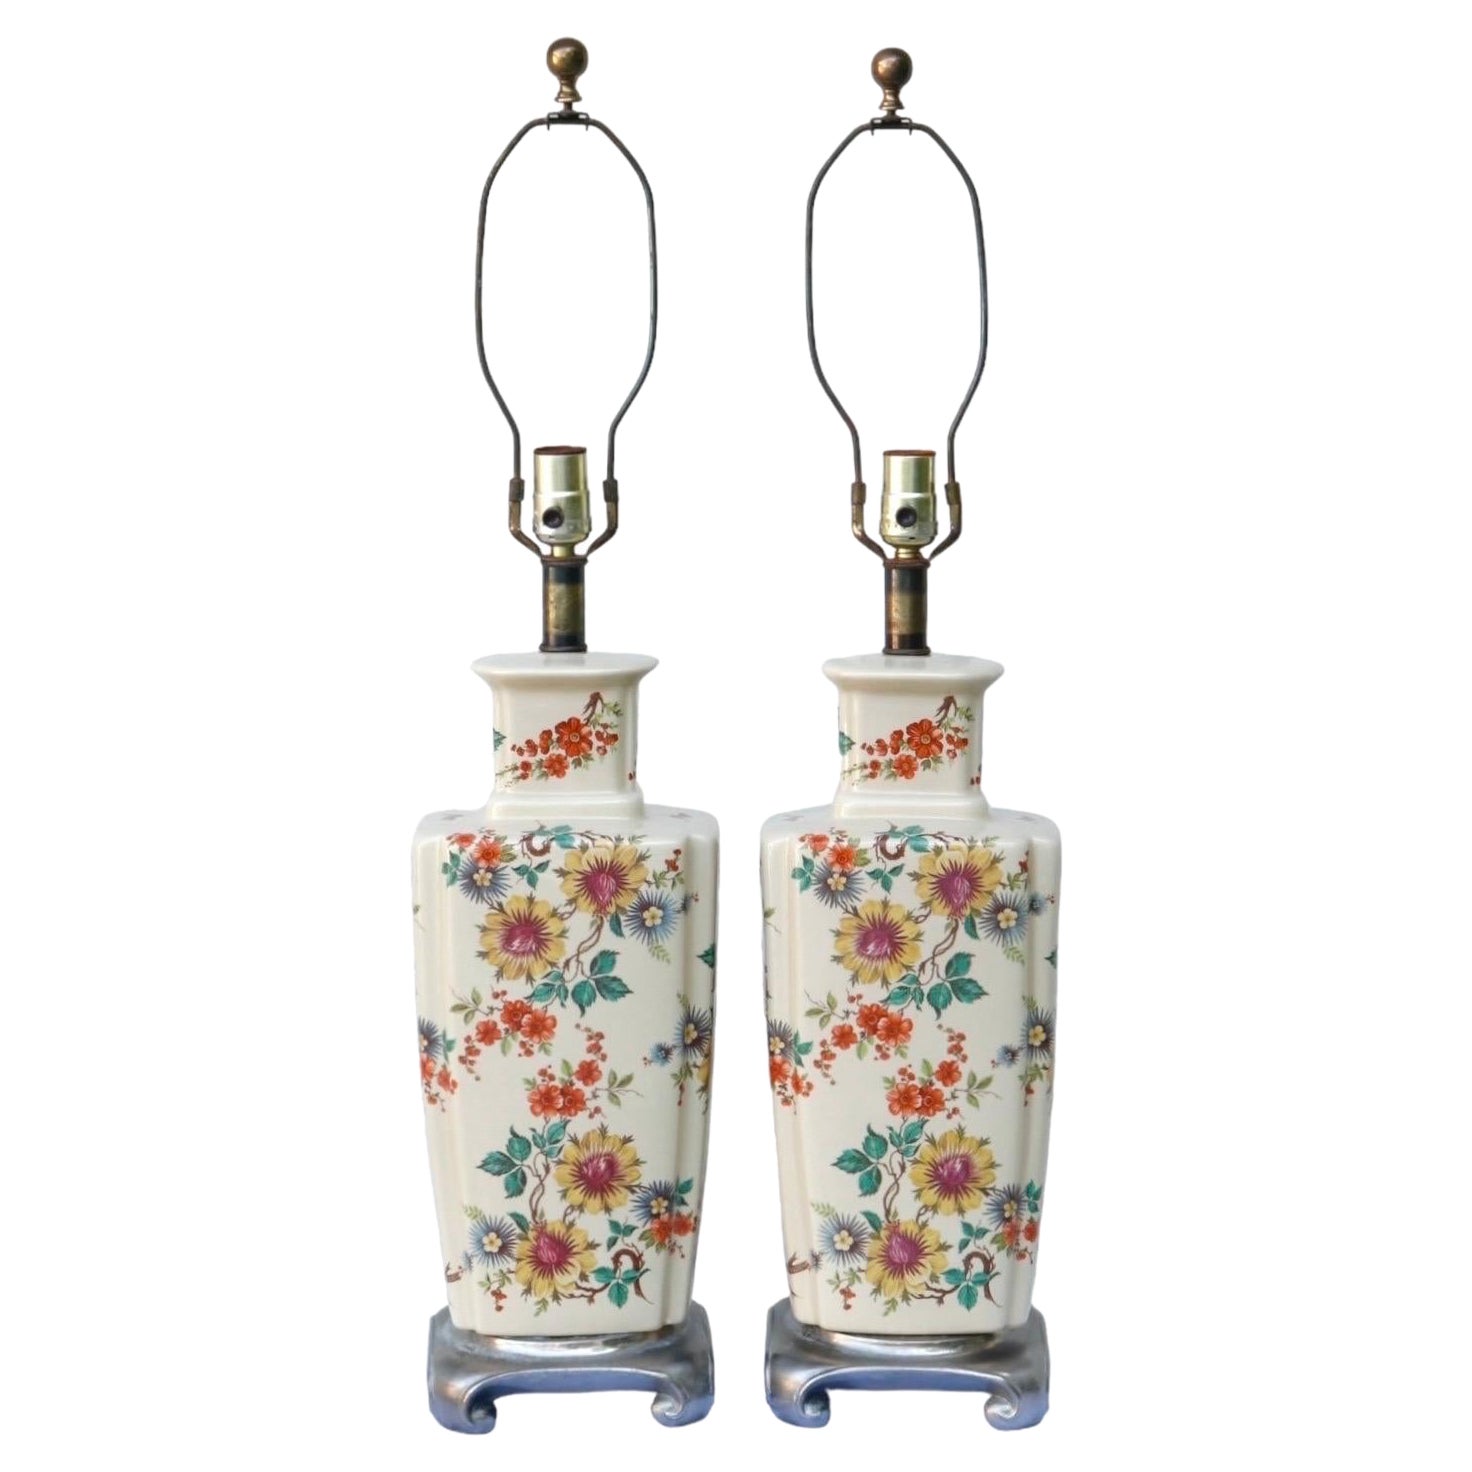 Ming Floral Ceramic Table Lamps - a Pair For Sale